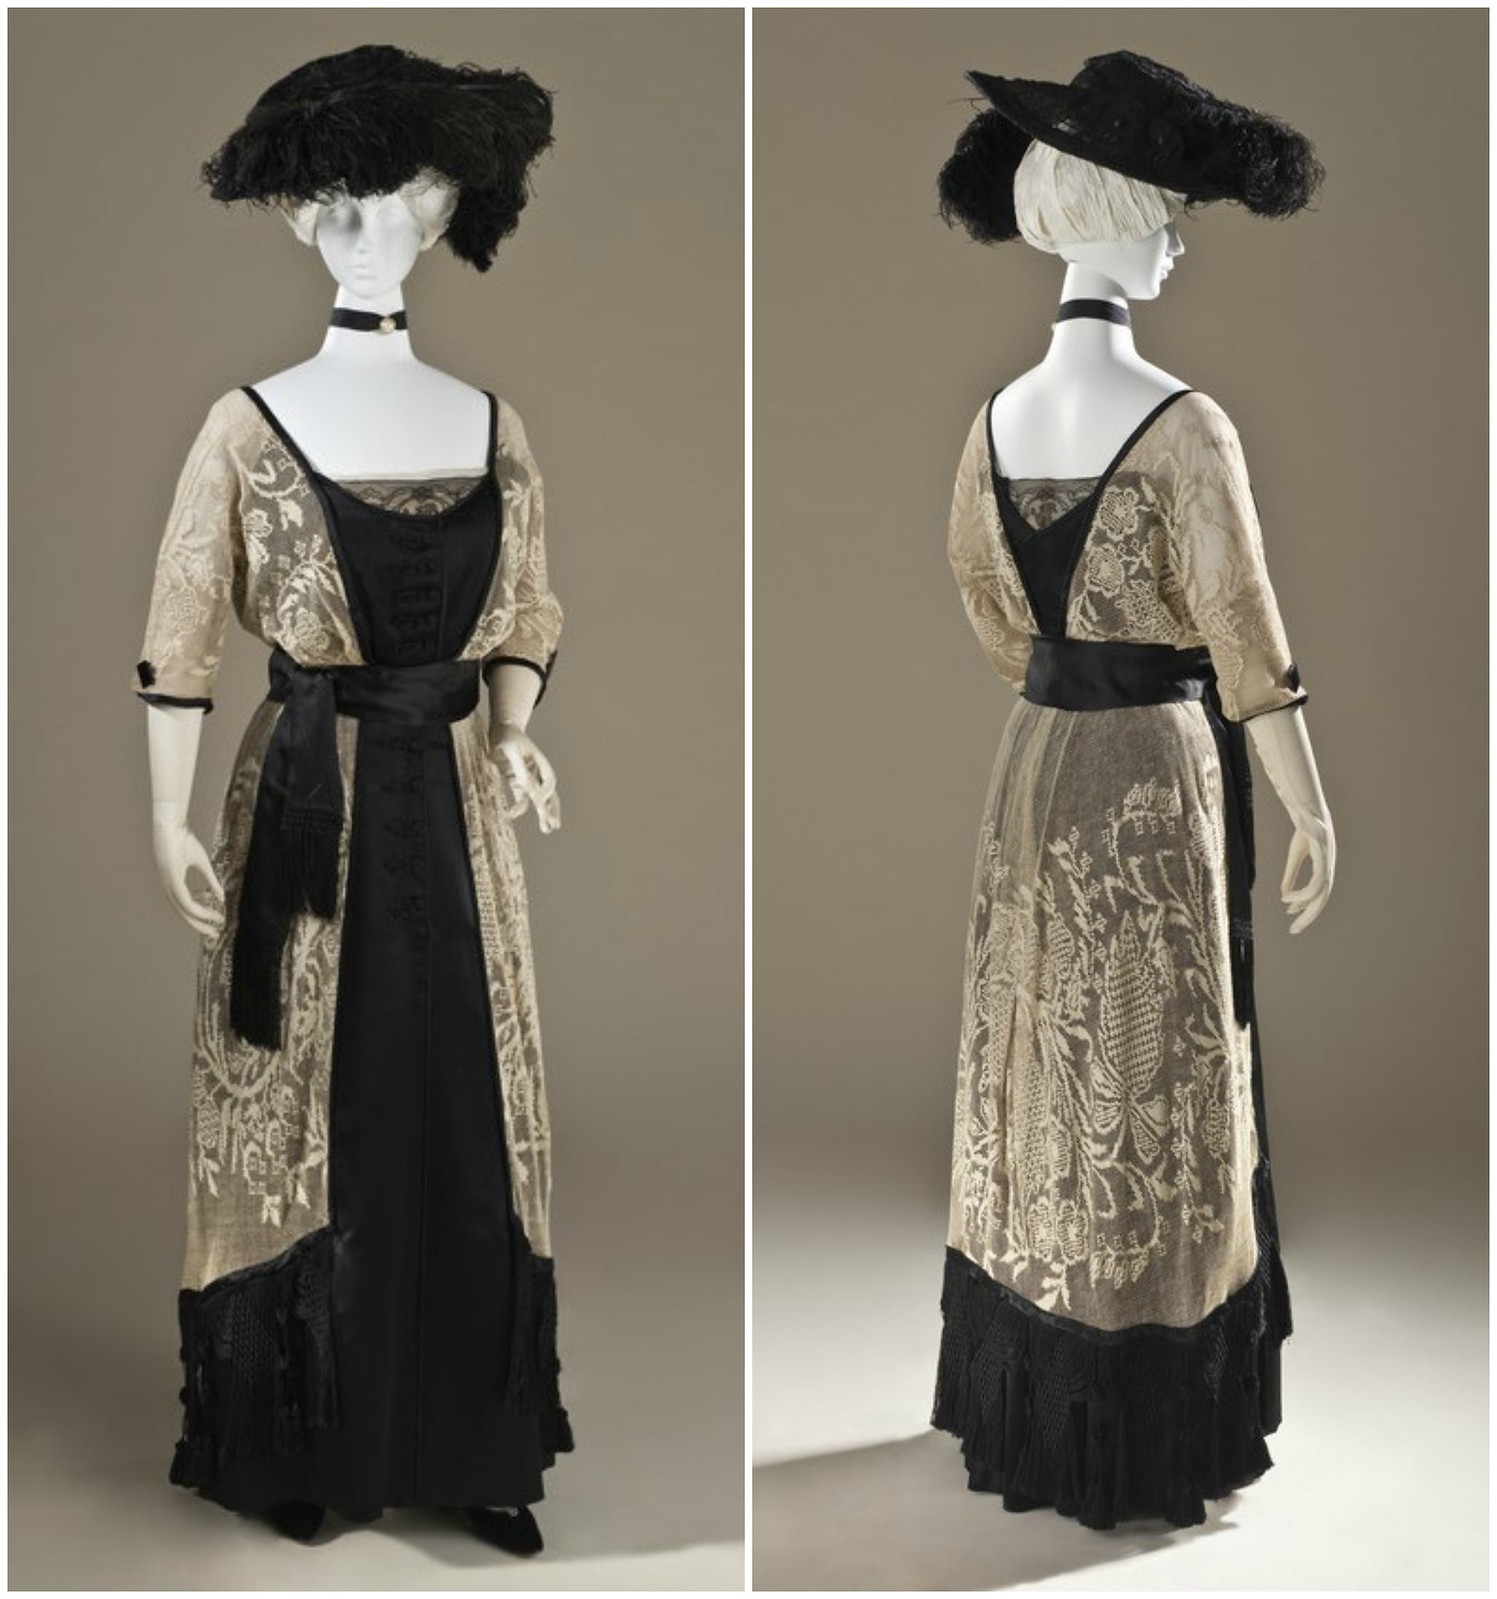 1915 Woman's Dress. Callot Soeurs. Linen lace and silk satin with silk-knotted fringe. LACMA